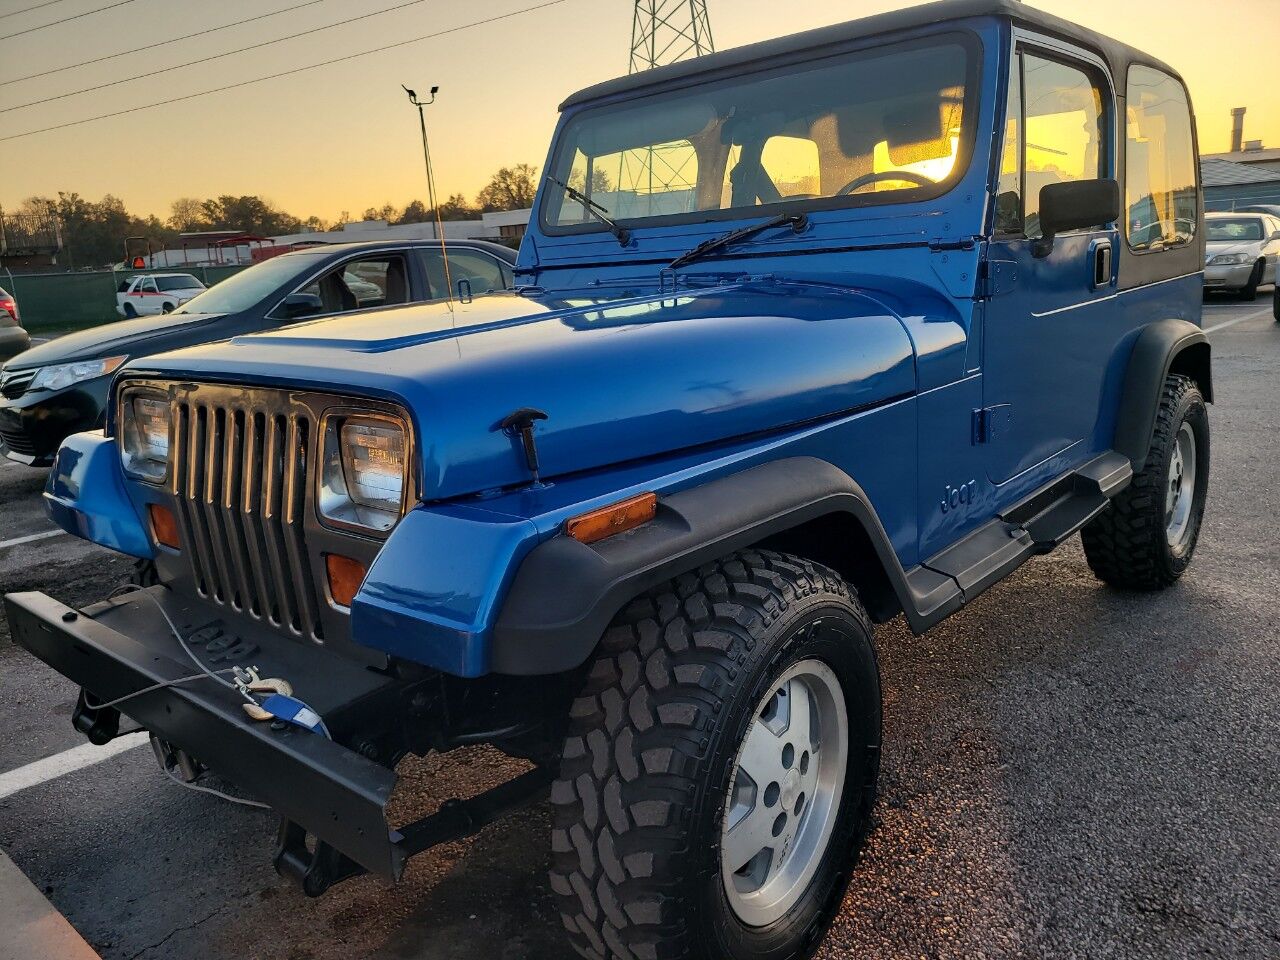 1991 Jeep Wrangler For Sale In Boise, ID ®